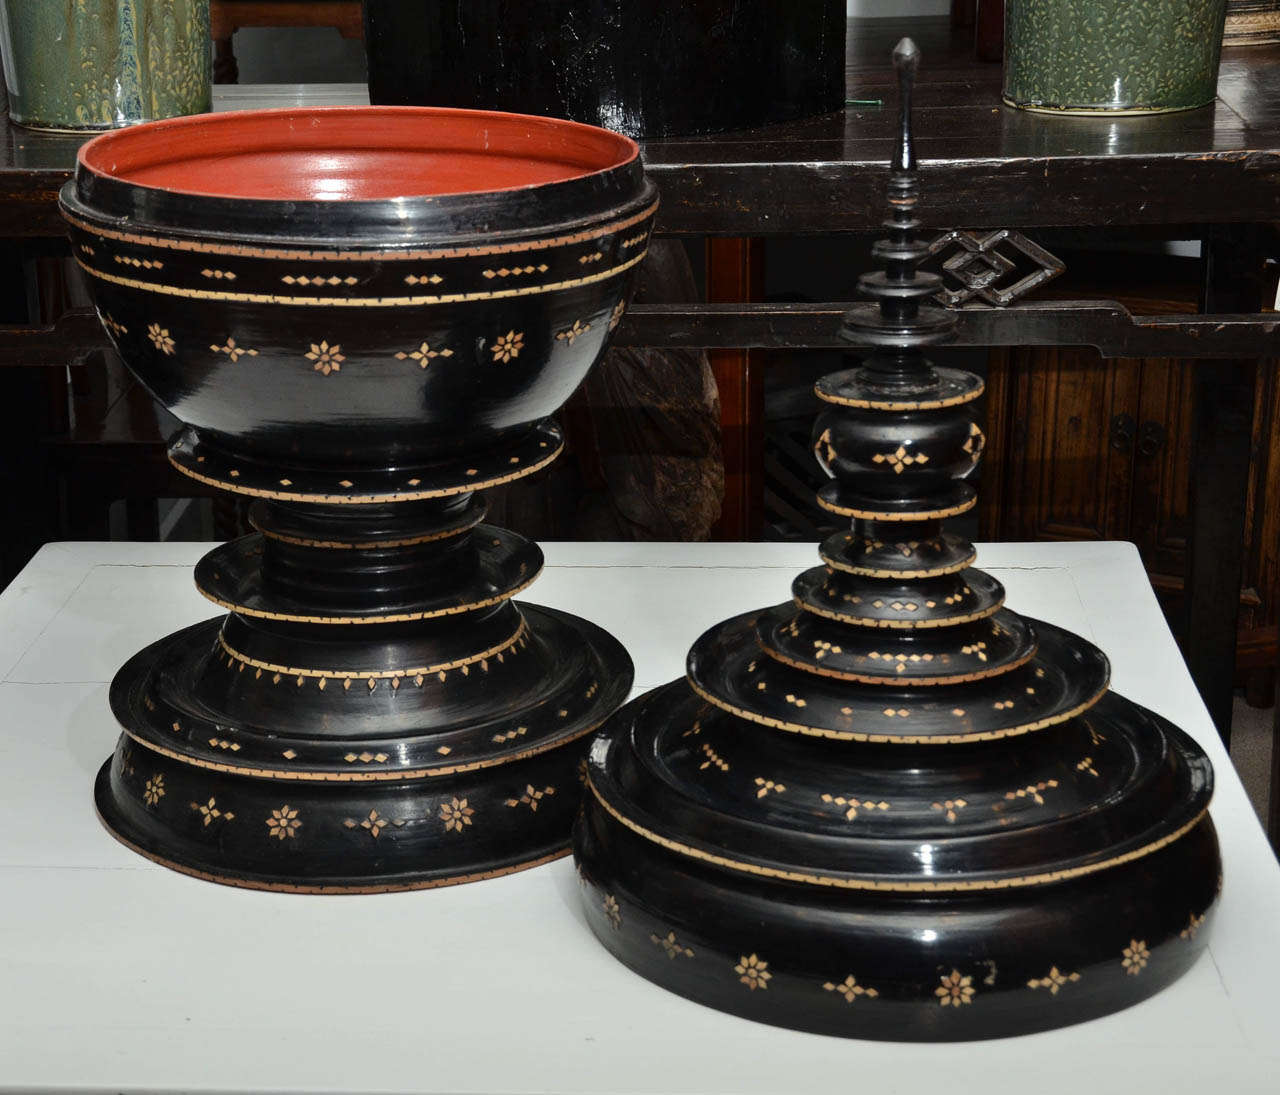 19th Century Late 19th century Black Lacquered Hsun Inlaid Lidded Offering, probably Burmese